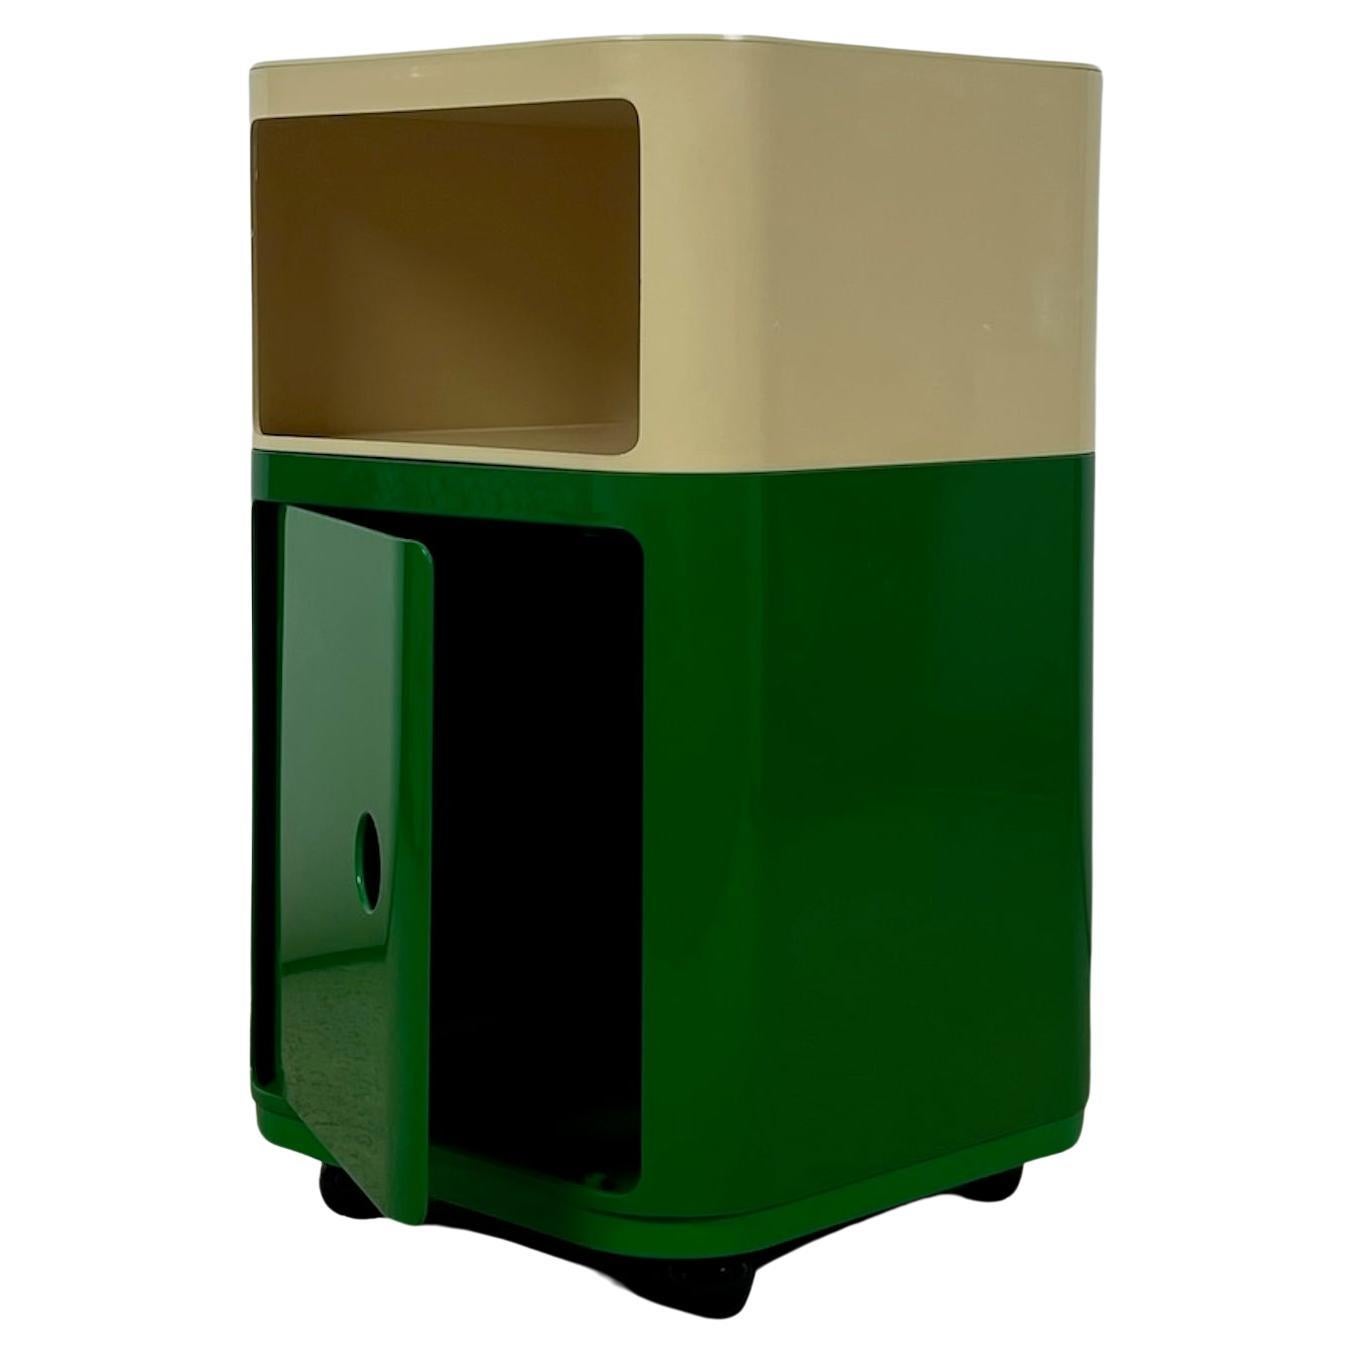 Kartell 'Componibili' Square Based Cabinet Modules in green and white, 1960s